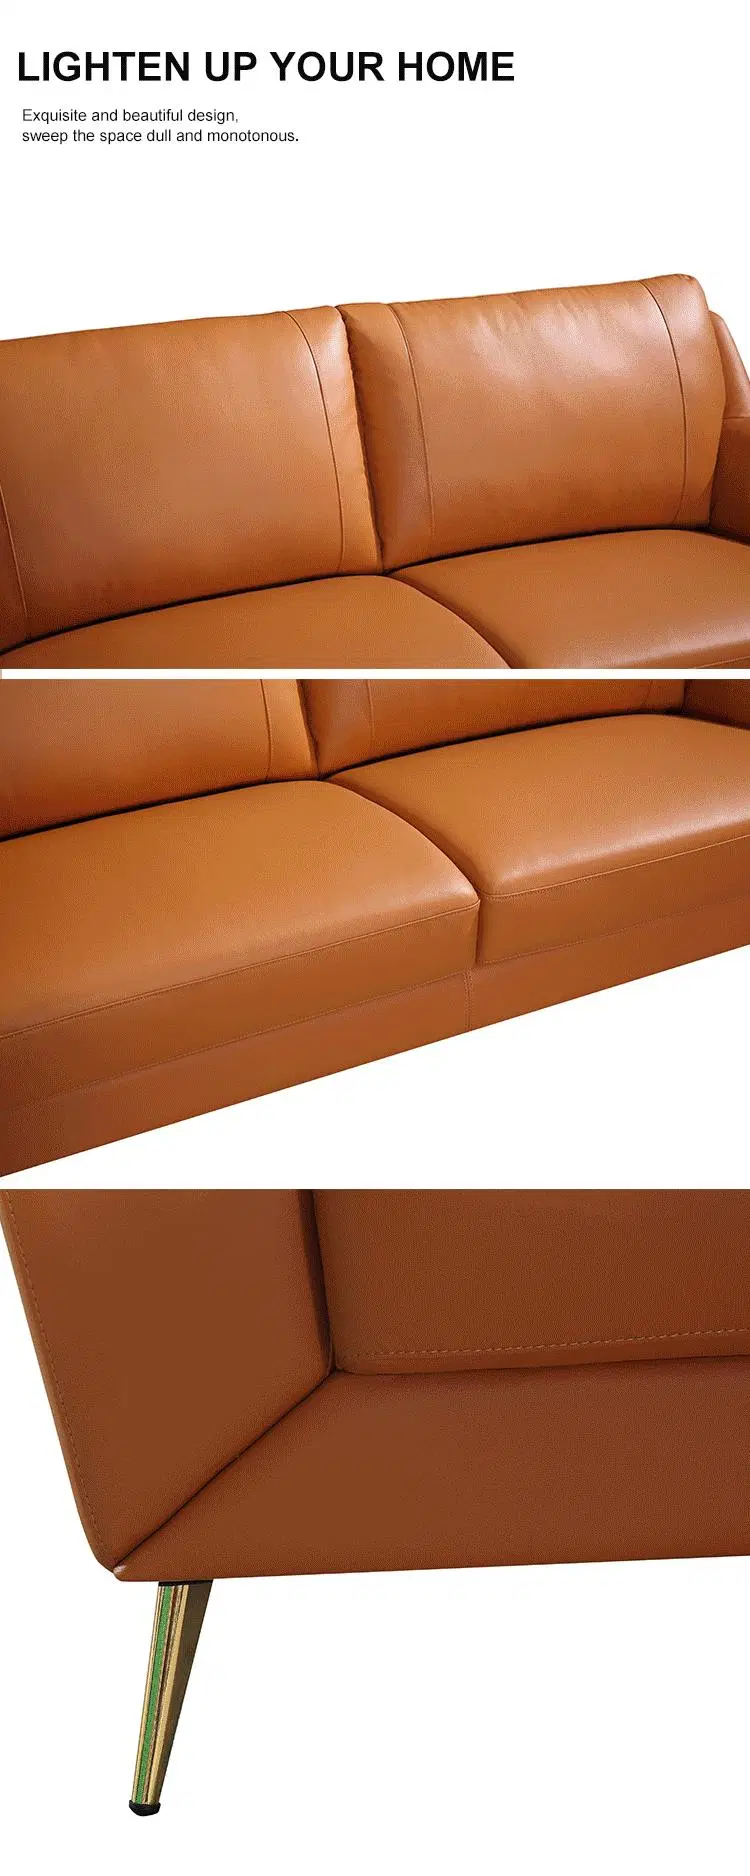 Hot Wood Genuine Leather Luxury Living Room Sofas Long Couch Settee Couches Sofa